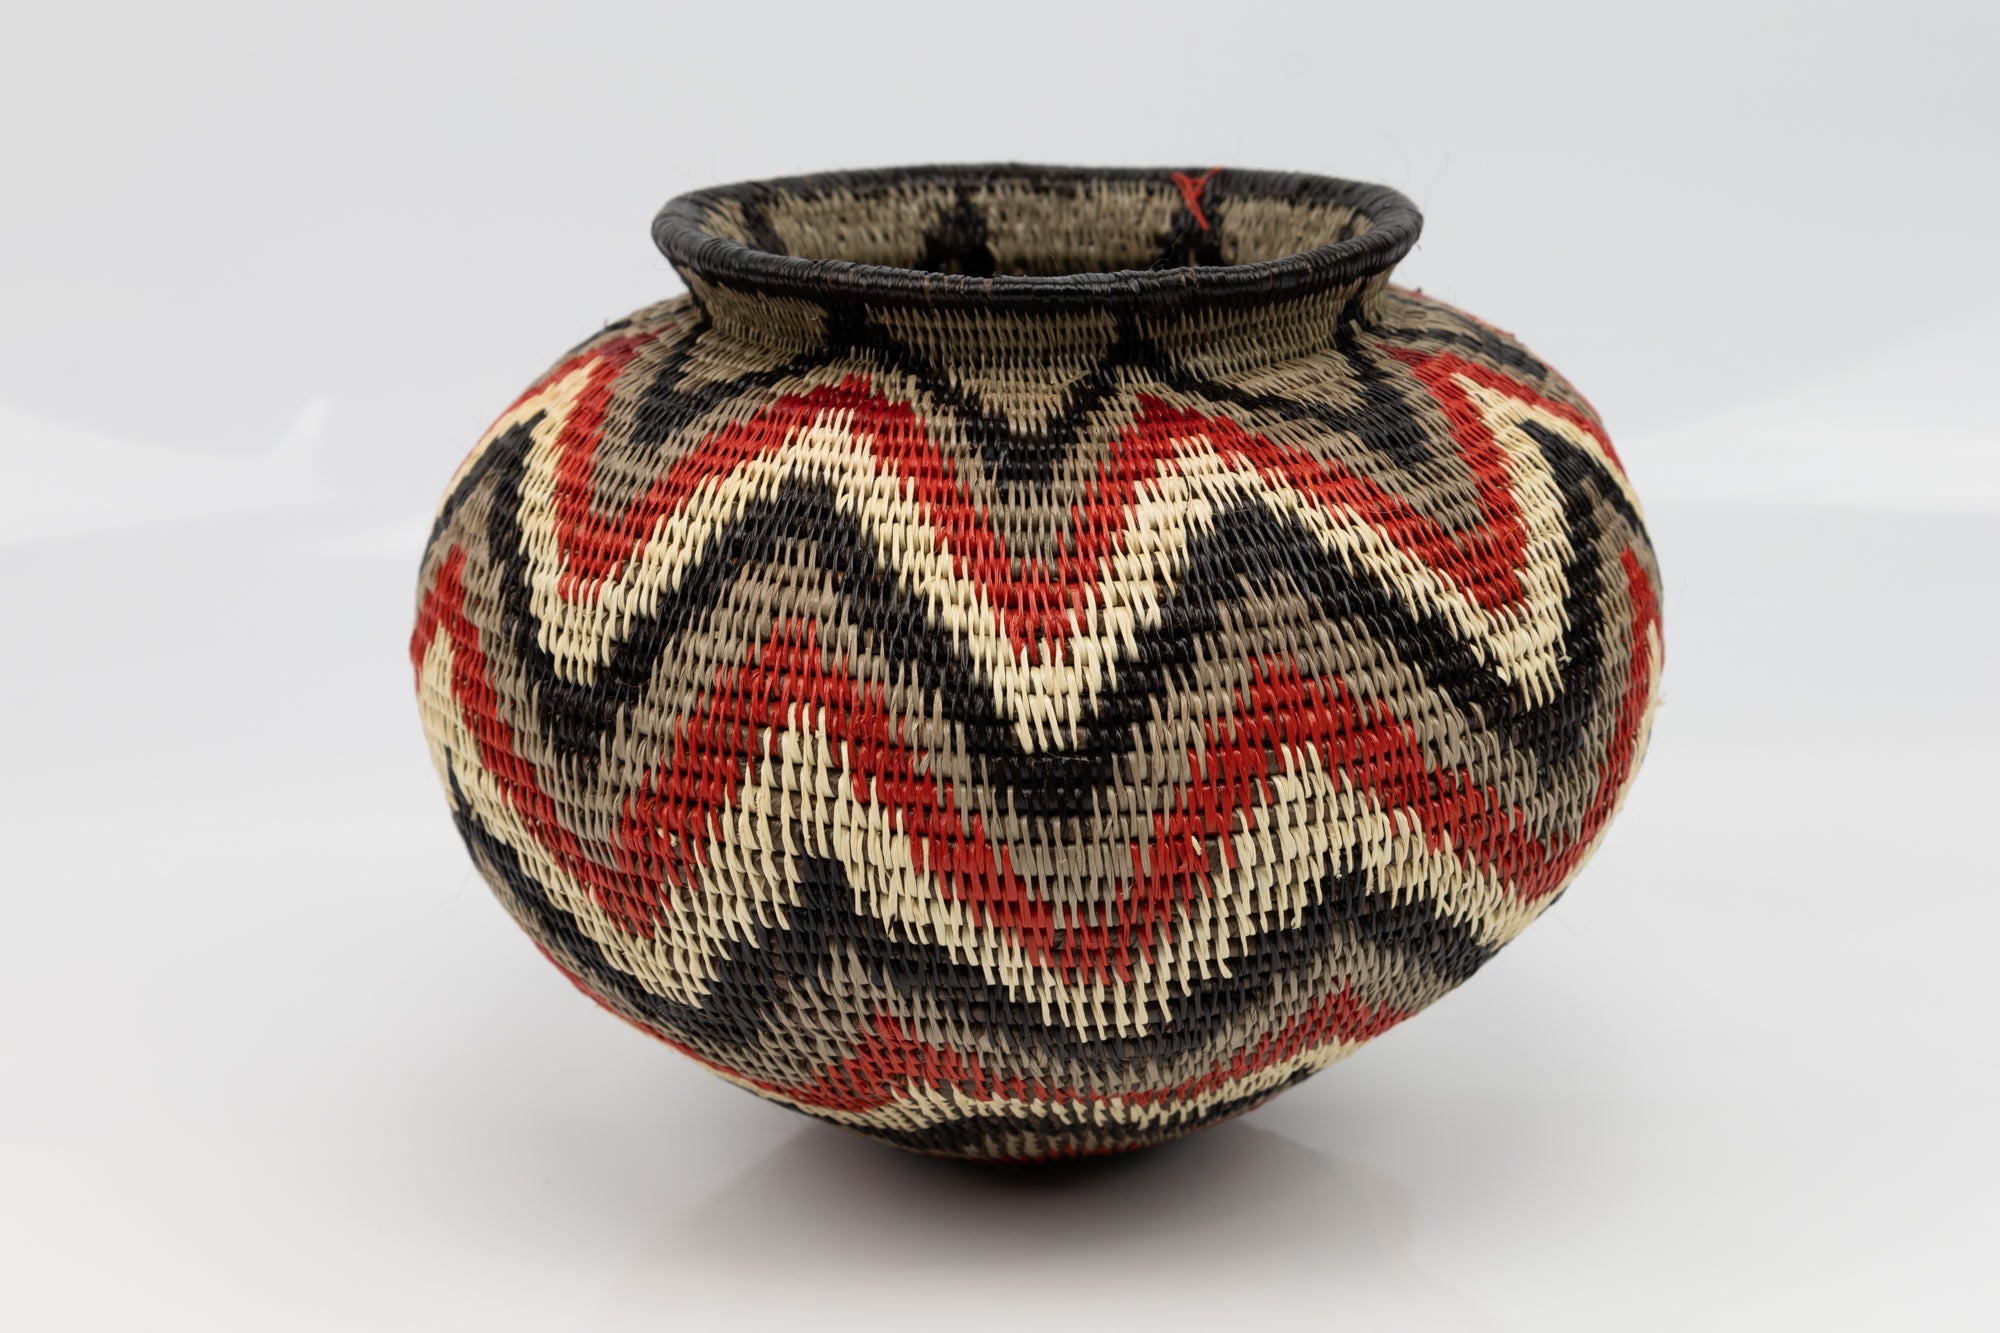 Black Gray and Red Woven Basket